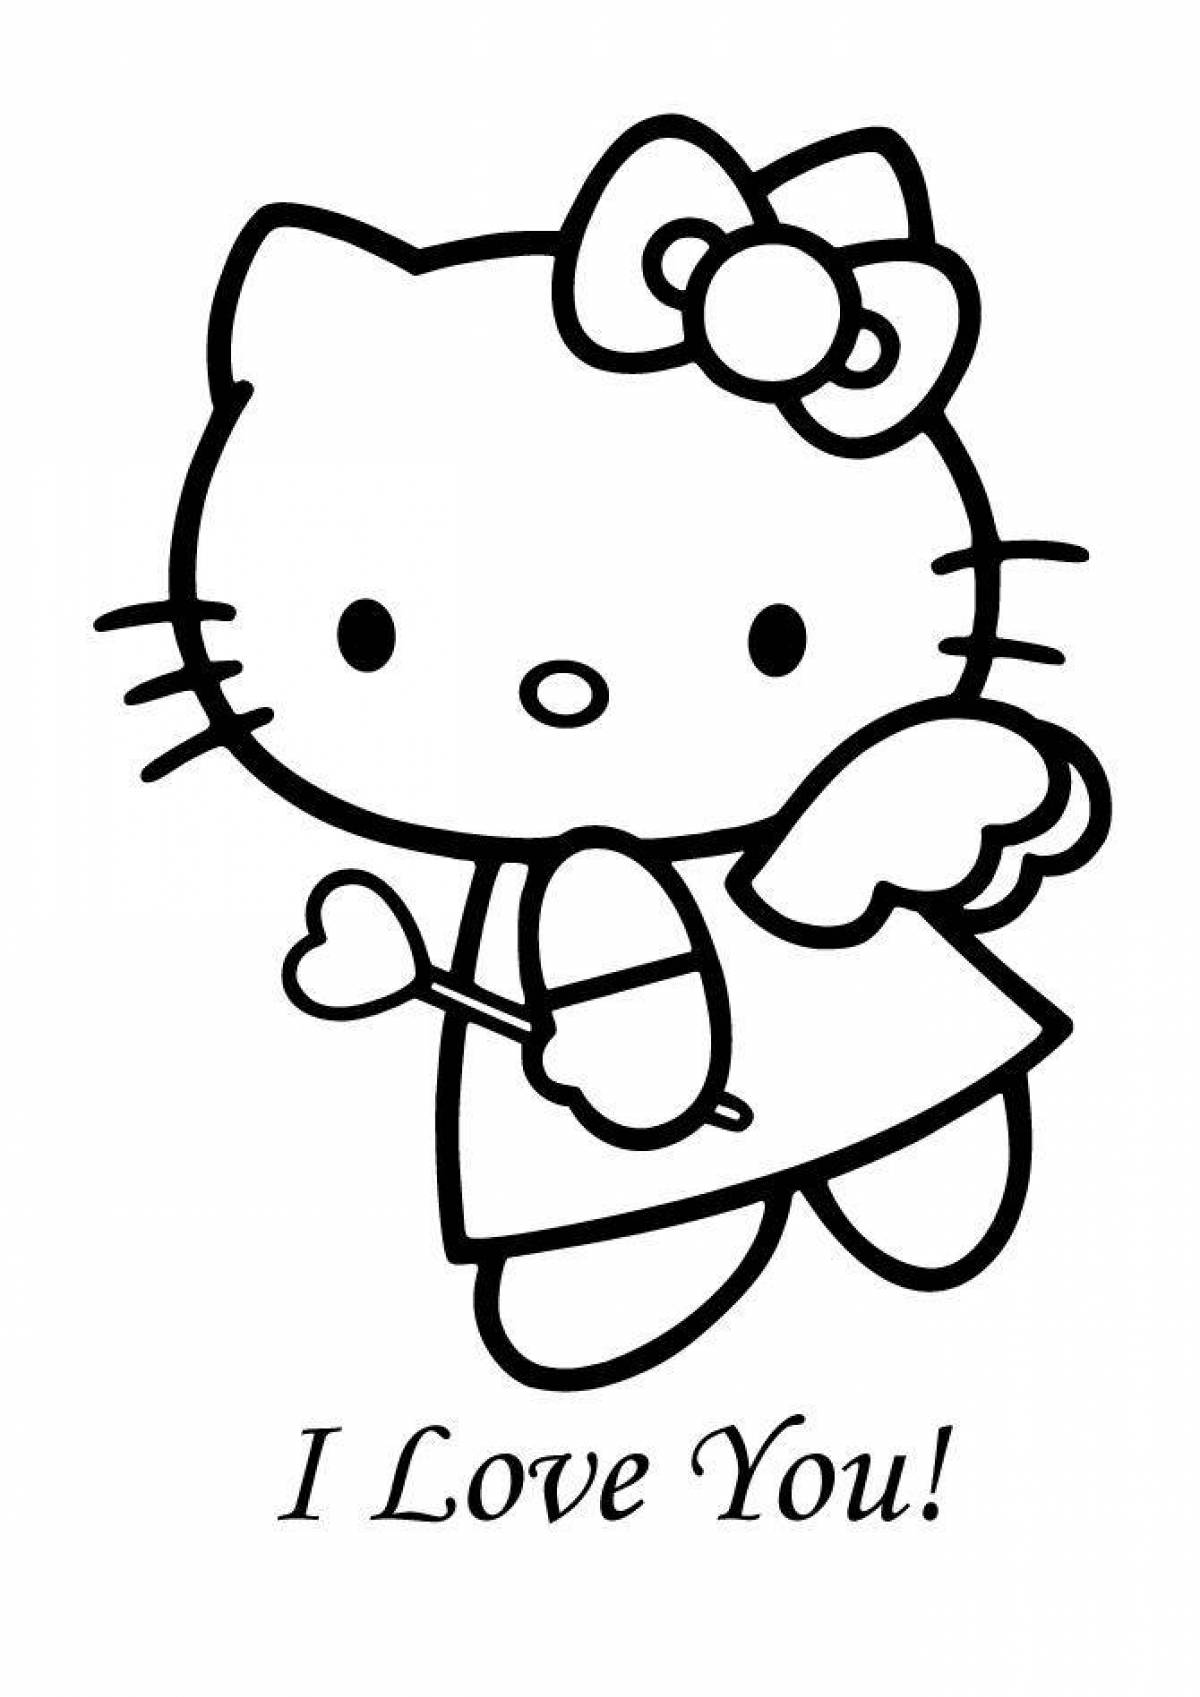 Colorful hello kitty chickens coloring page